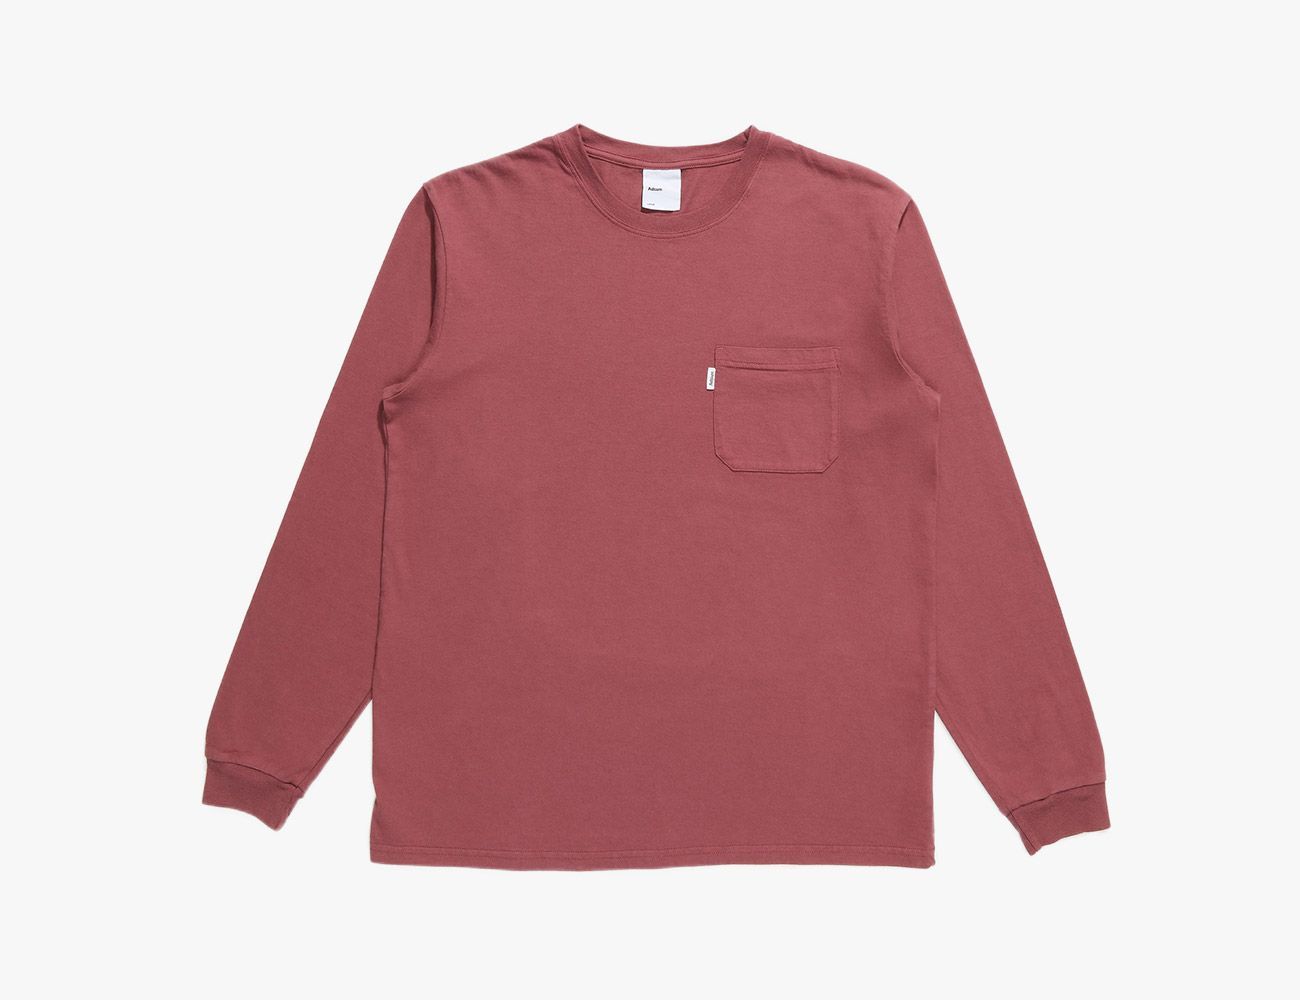 The Long-Sleeve T-Shirts to Buy Now